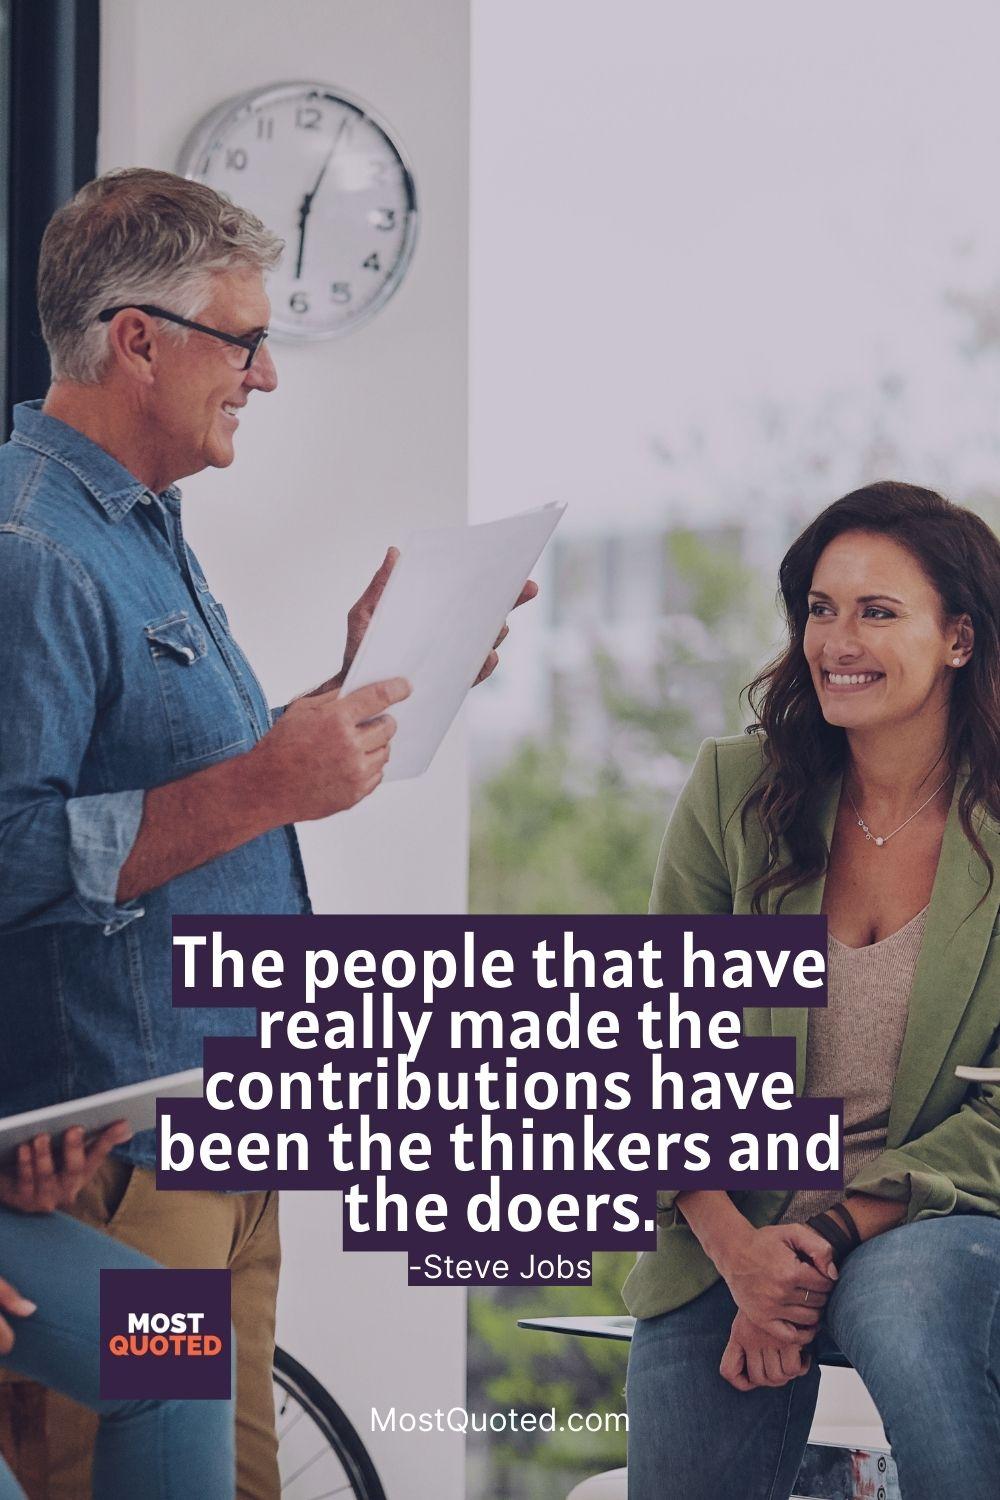 The people that have really made the contributions have been the thinkers and the doers. - Steve Jobs